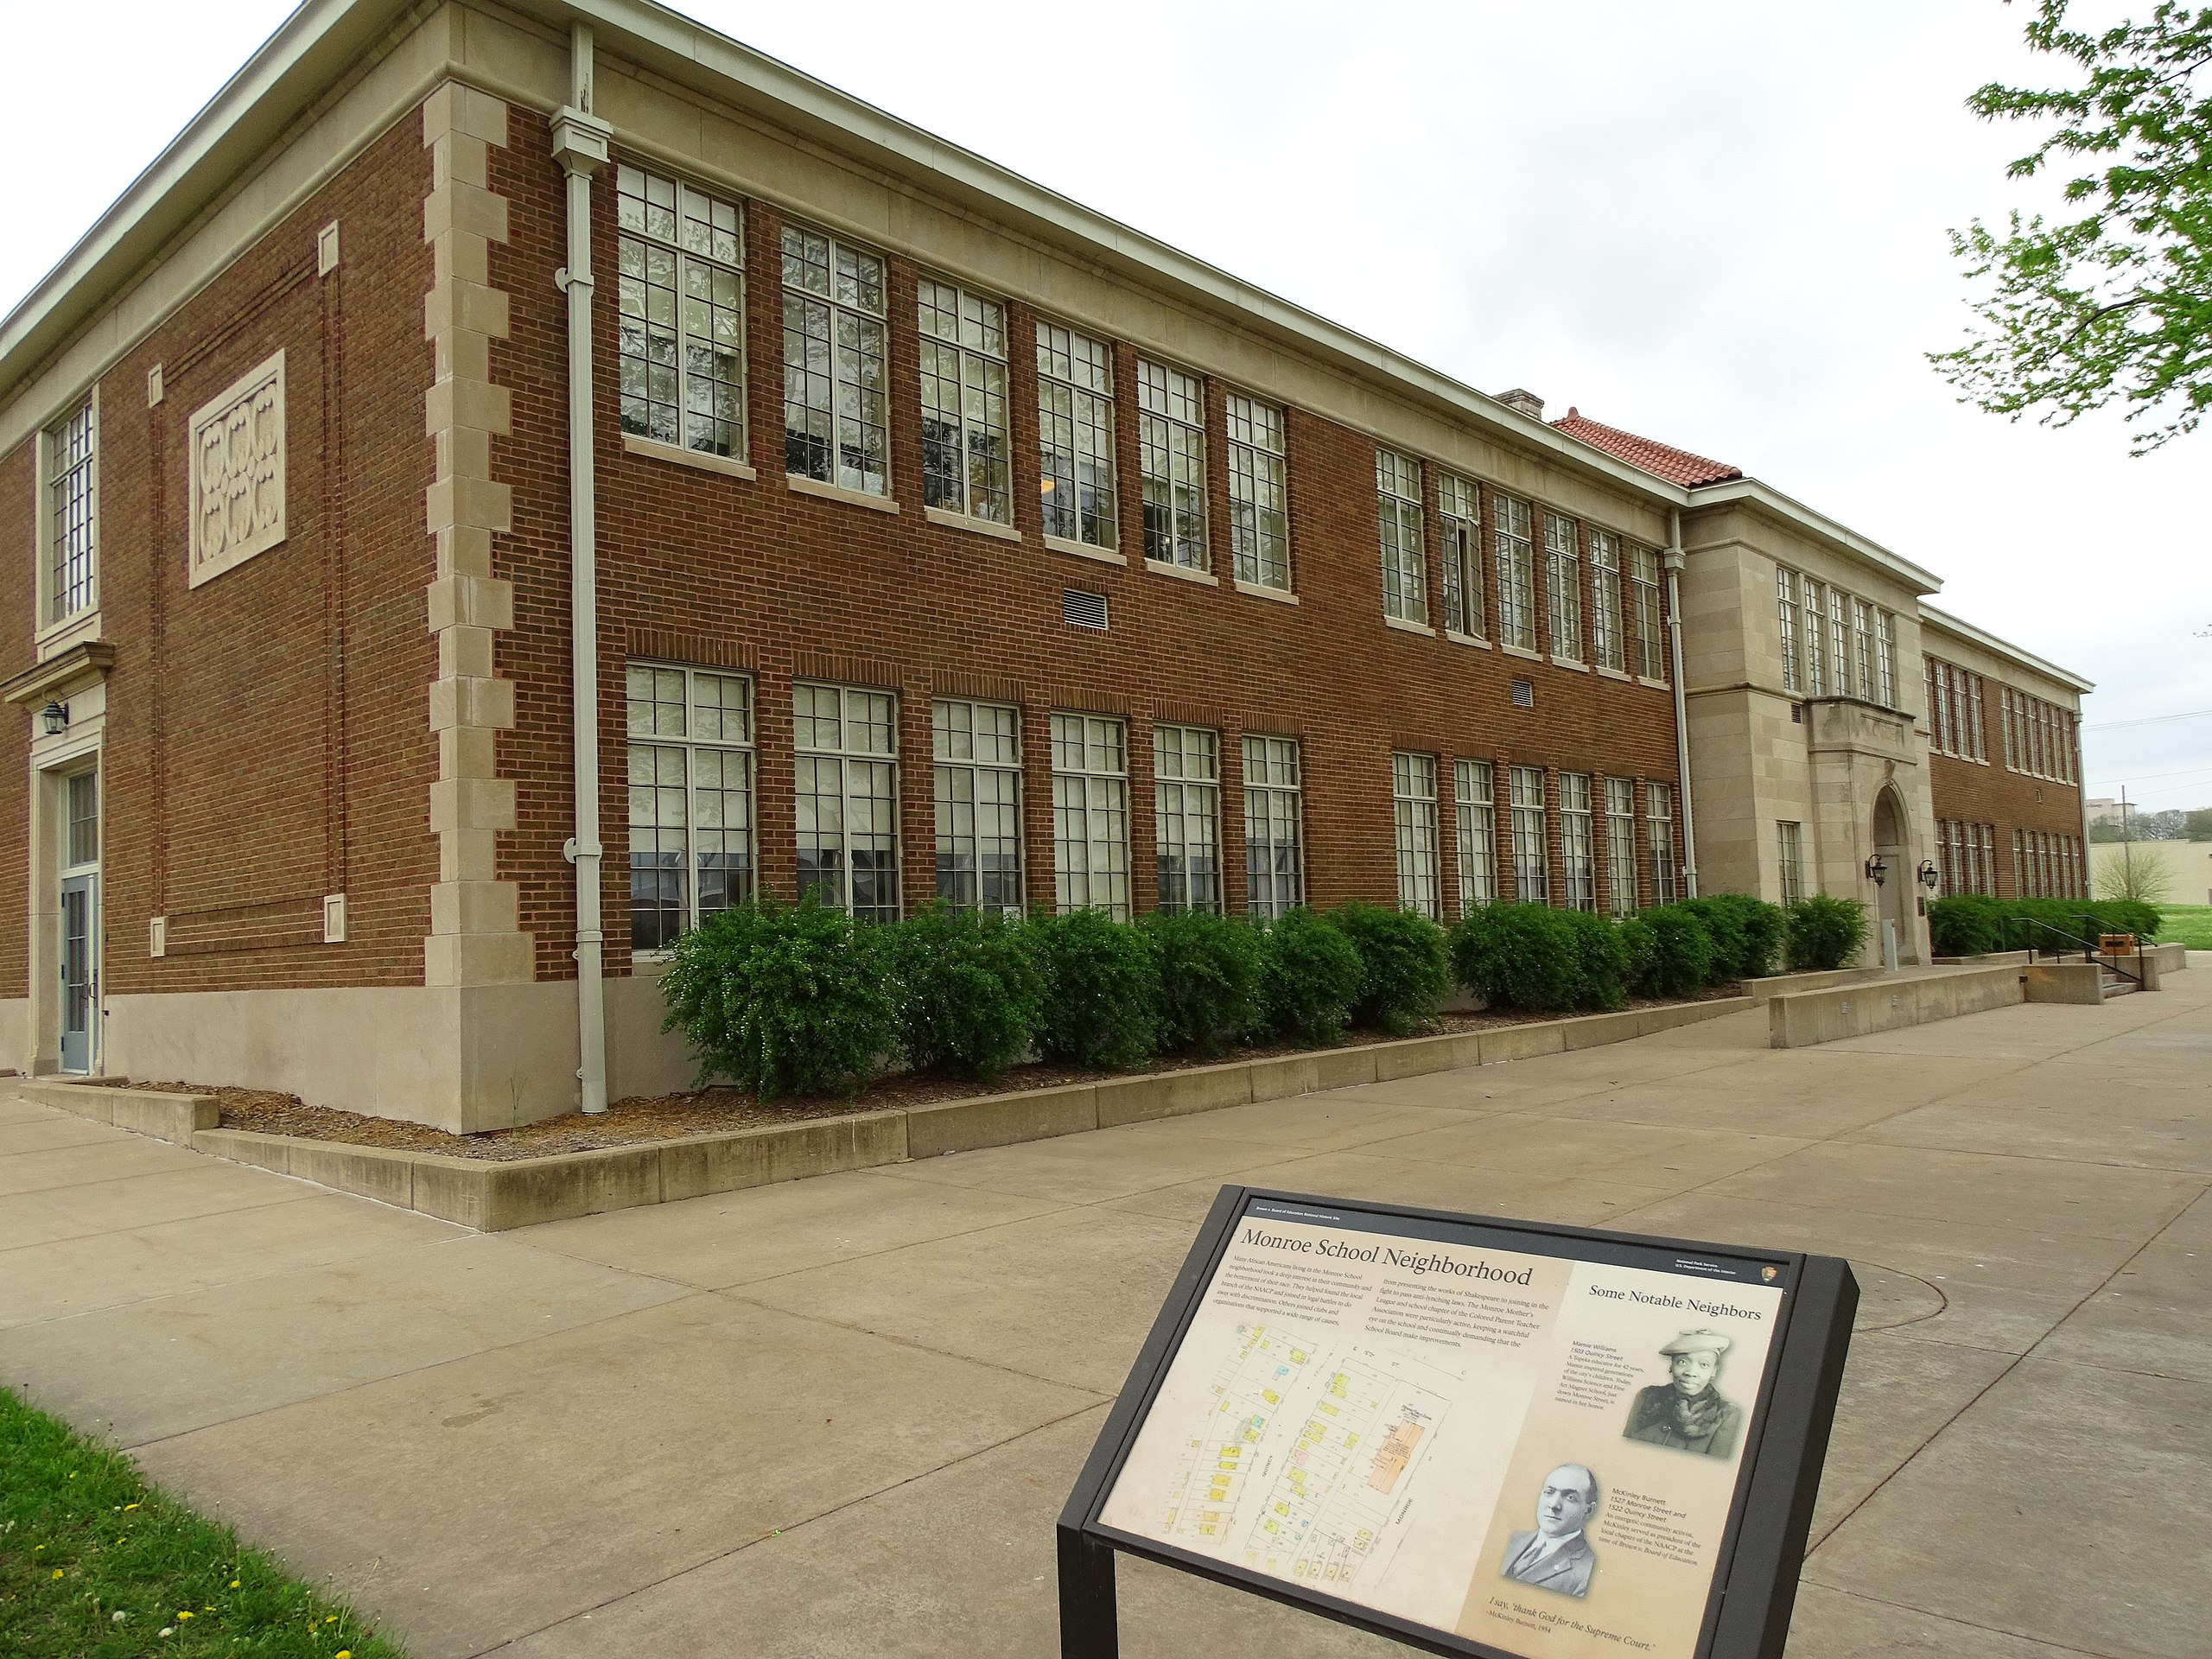 Monroe Elementary School is a national historic site as part of Brown v. Board of Education | Kansas National Parks